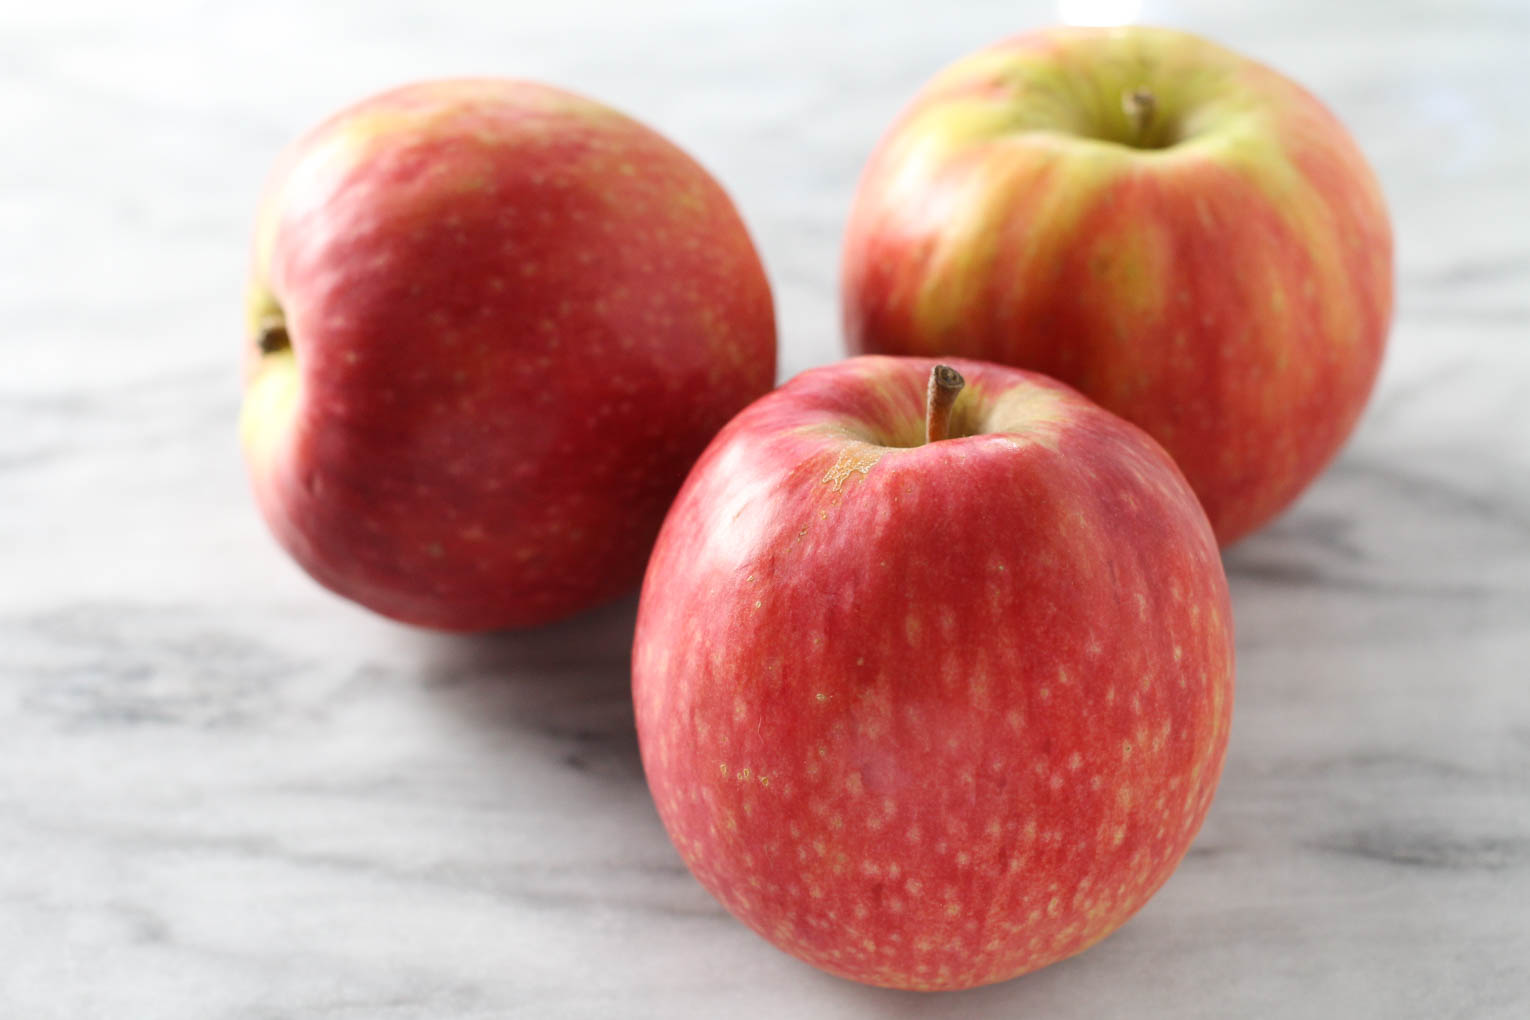 Three Pink Lady apples on marble background.